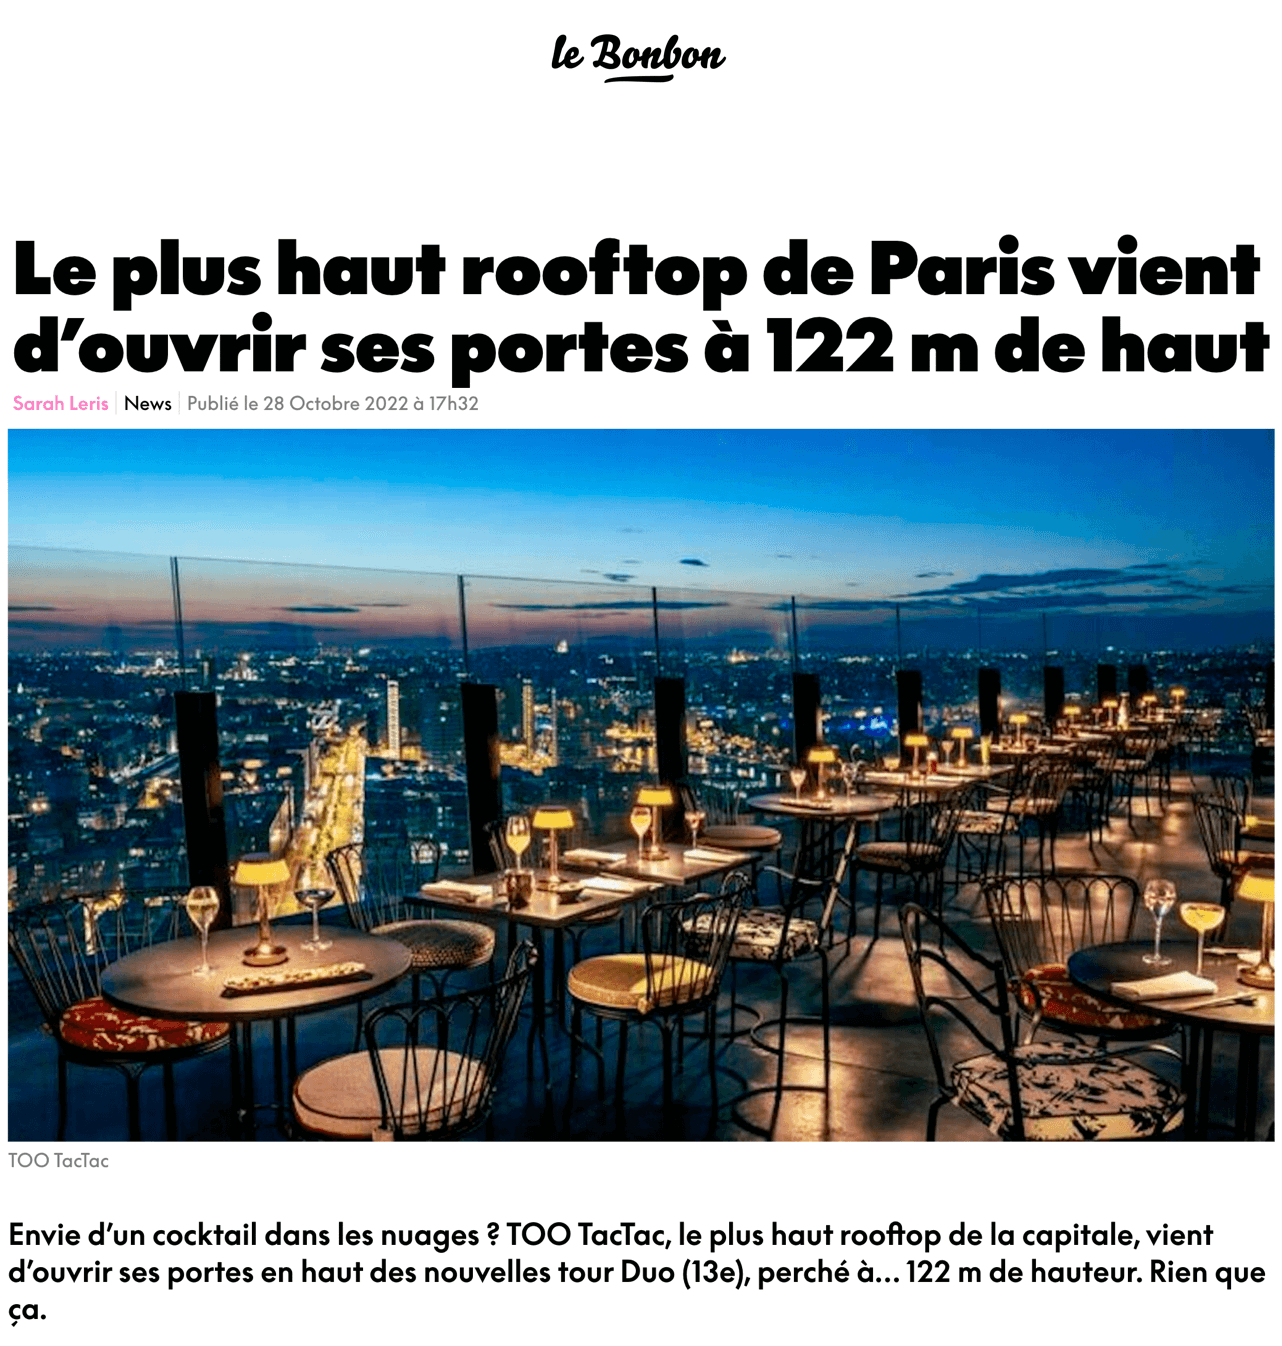 The highest rooftop in Paris has just opened its doors at 122 m high